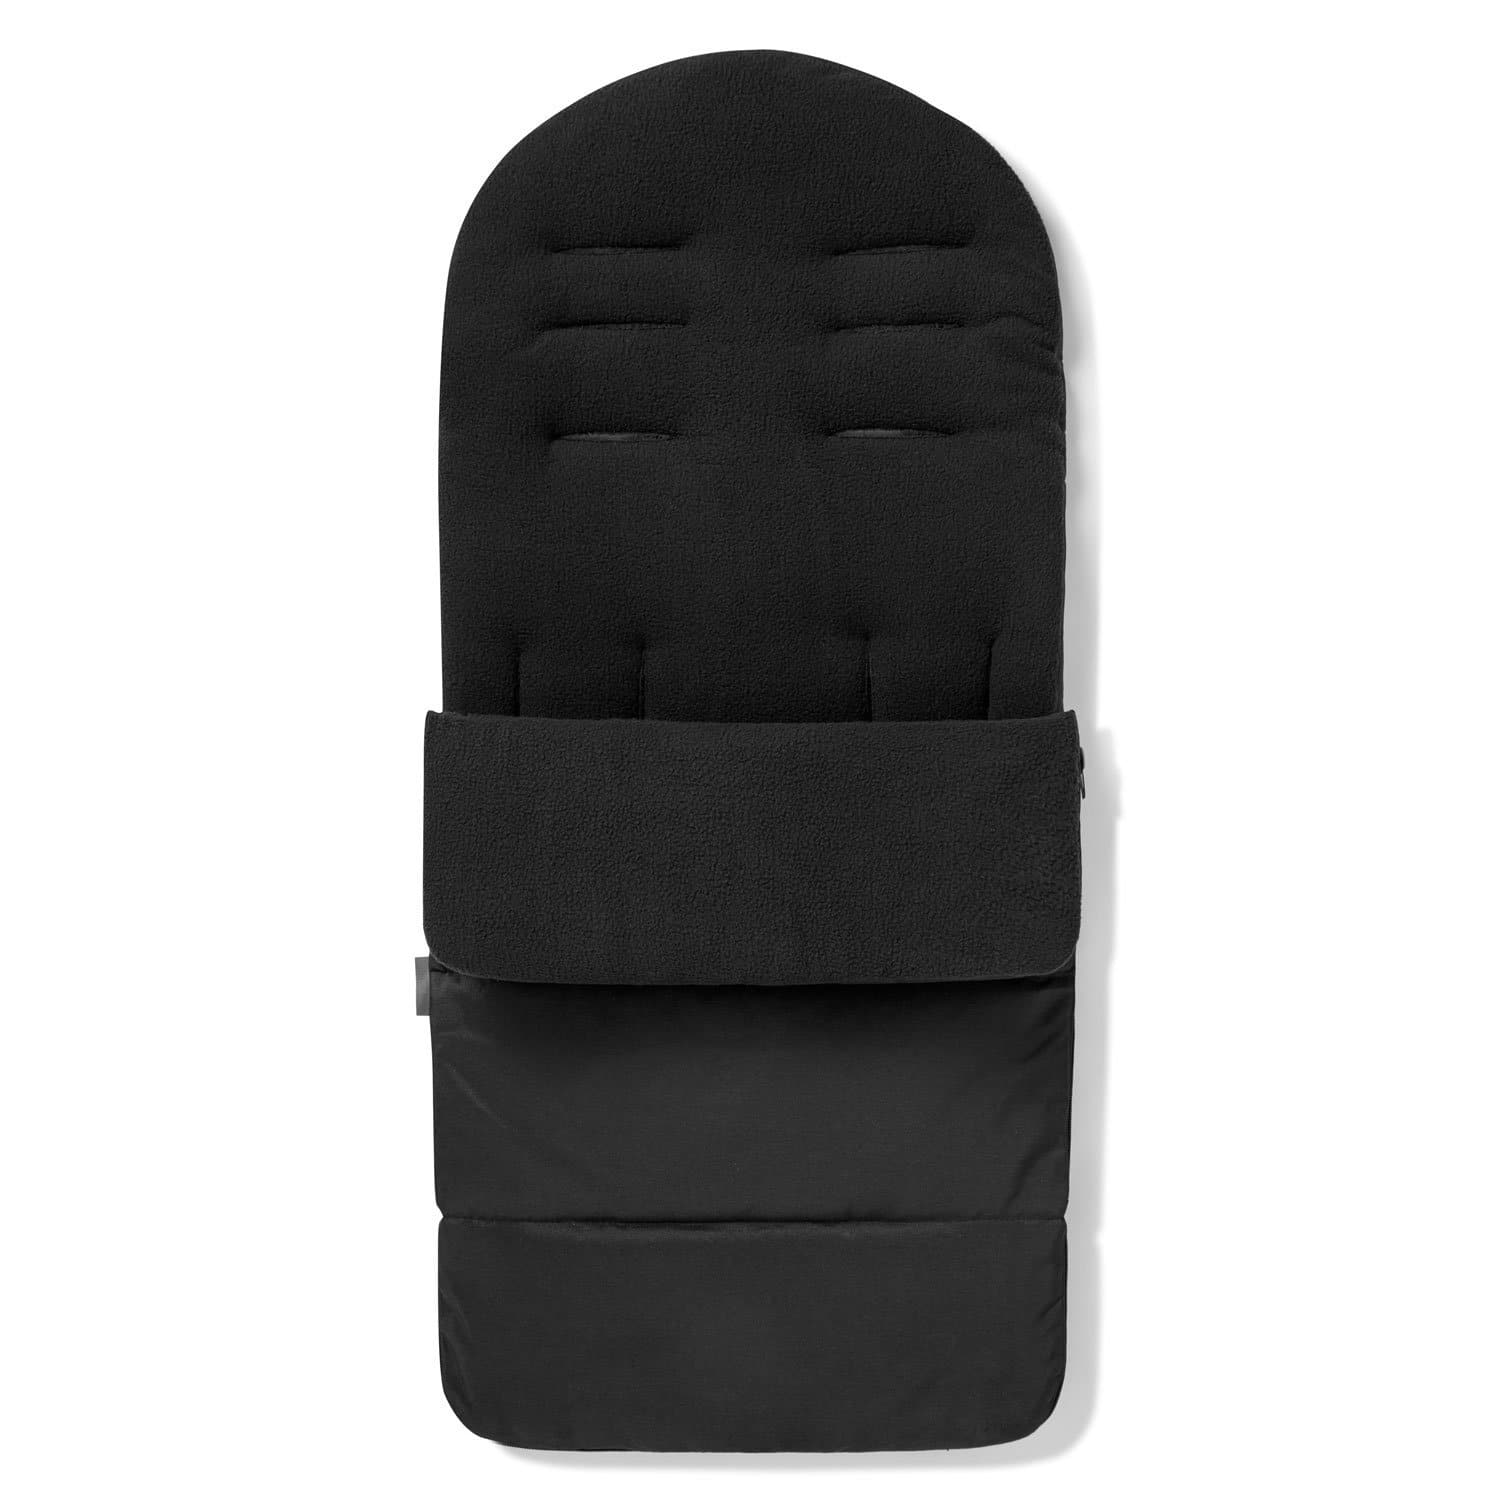 Premium Footmuff / Cosy Toes Compatible with Zooper - Black Jack / Fits All Models | For Your Little One